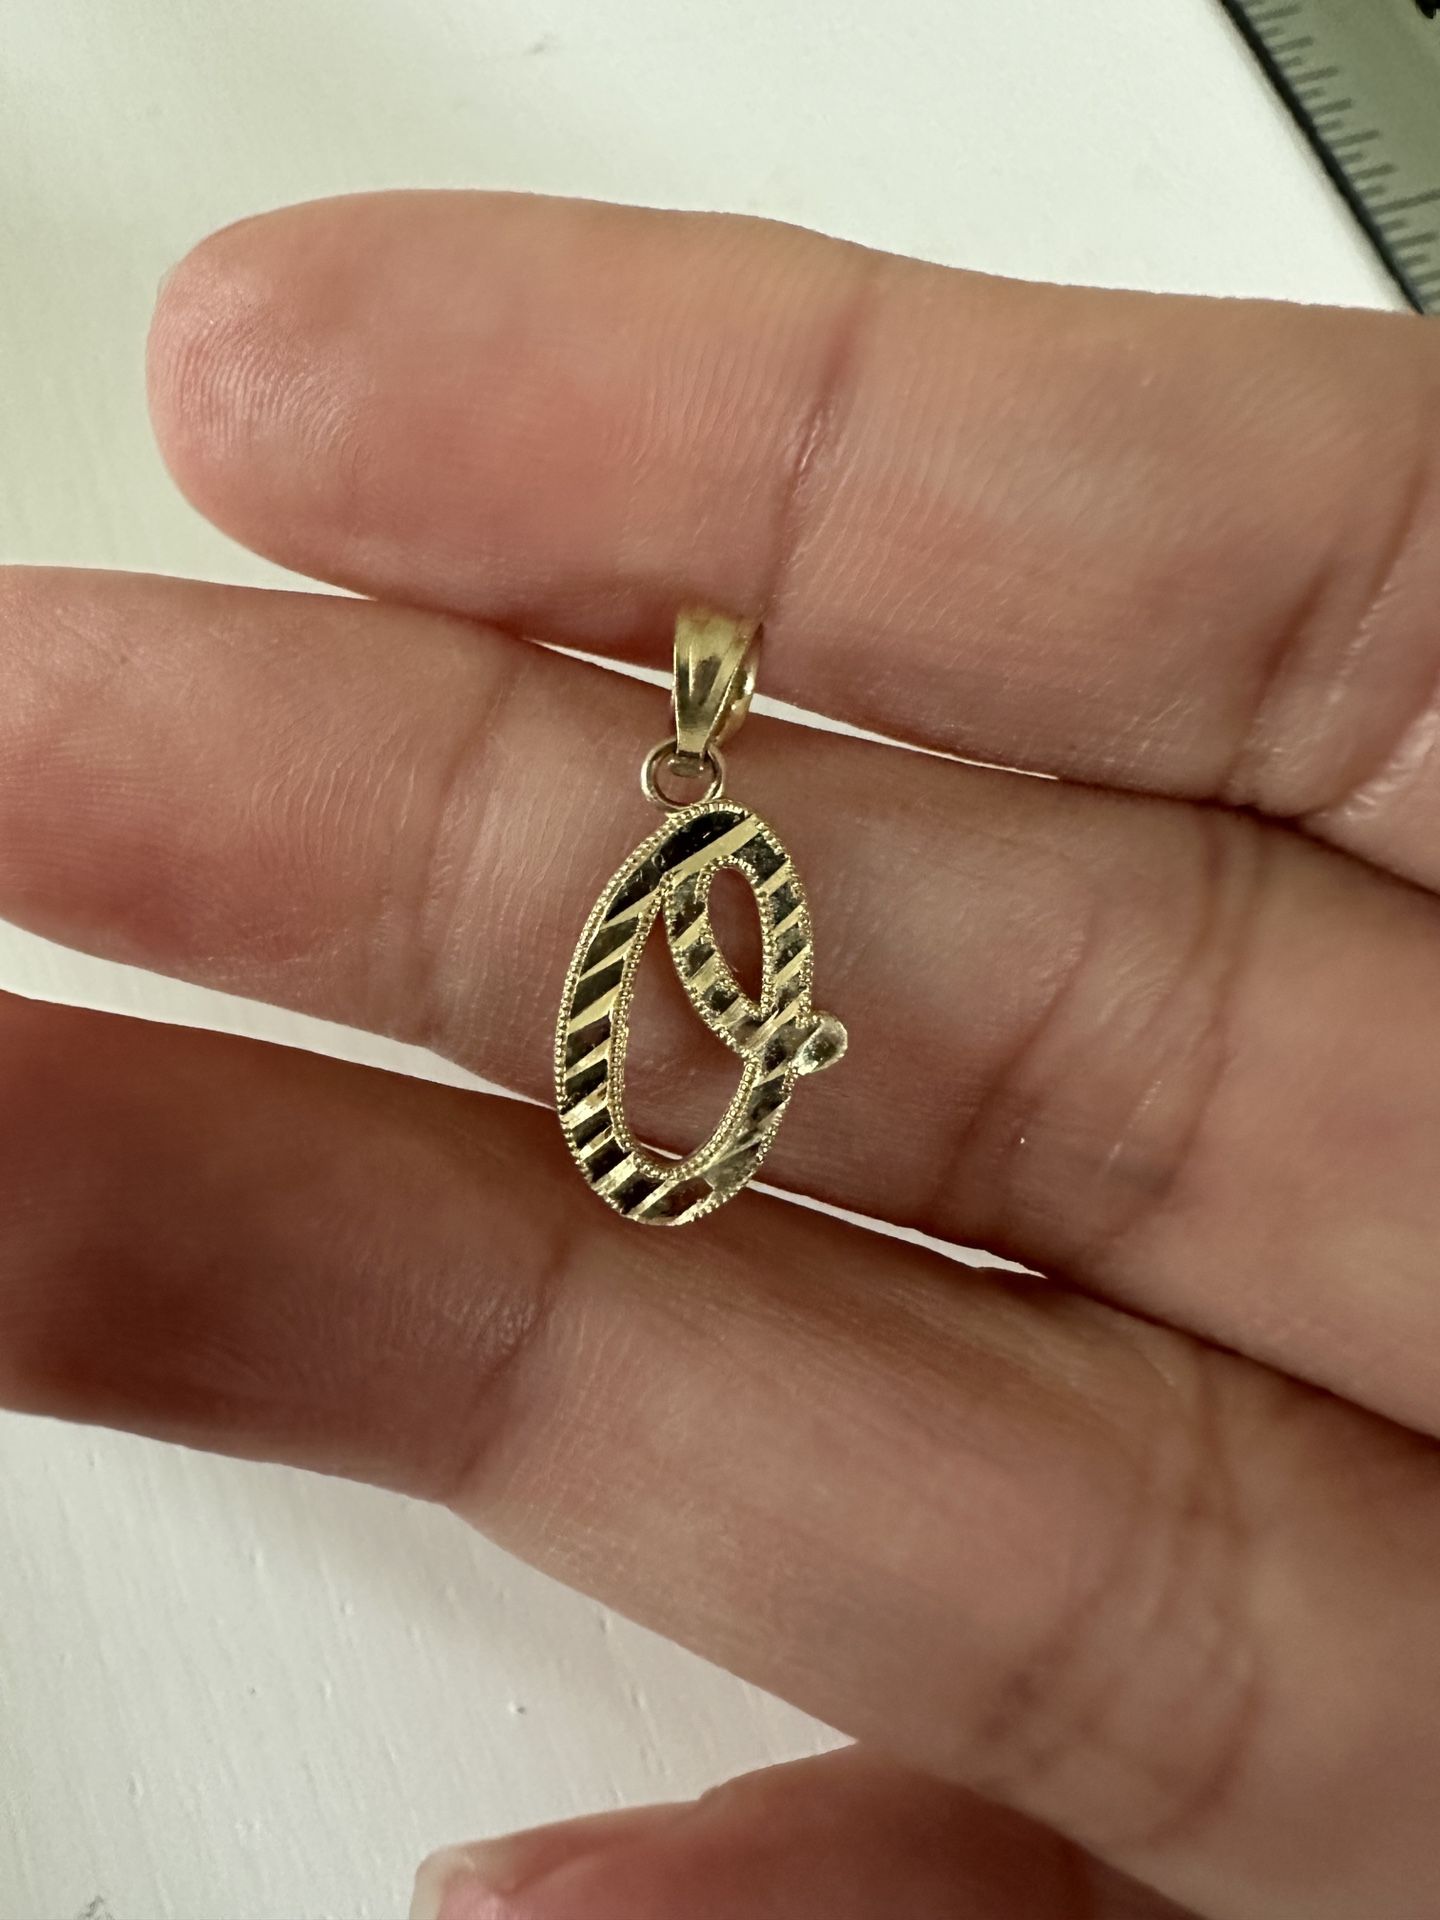 10kt Yellow Gold Initial O Pendant 